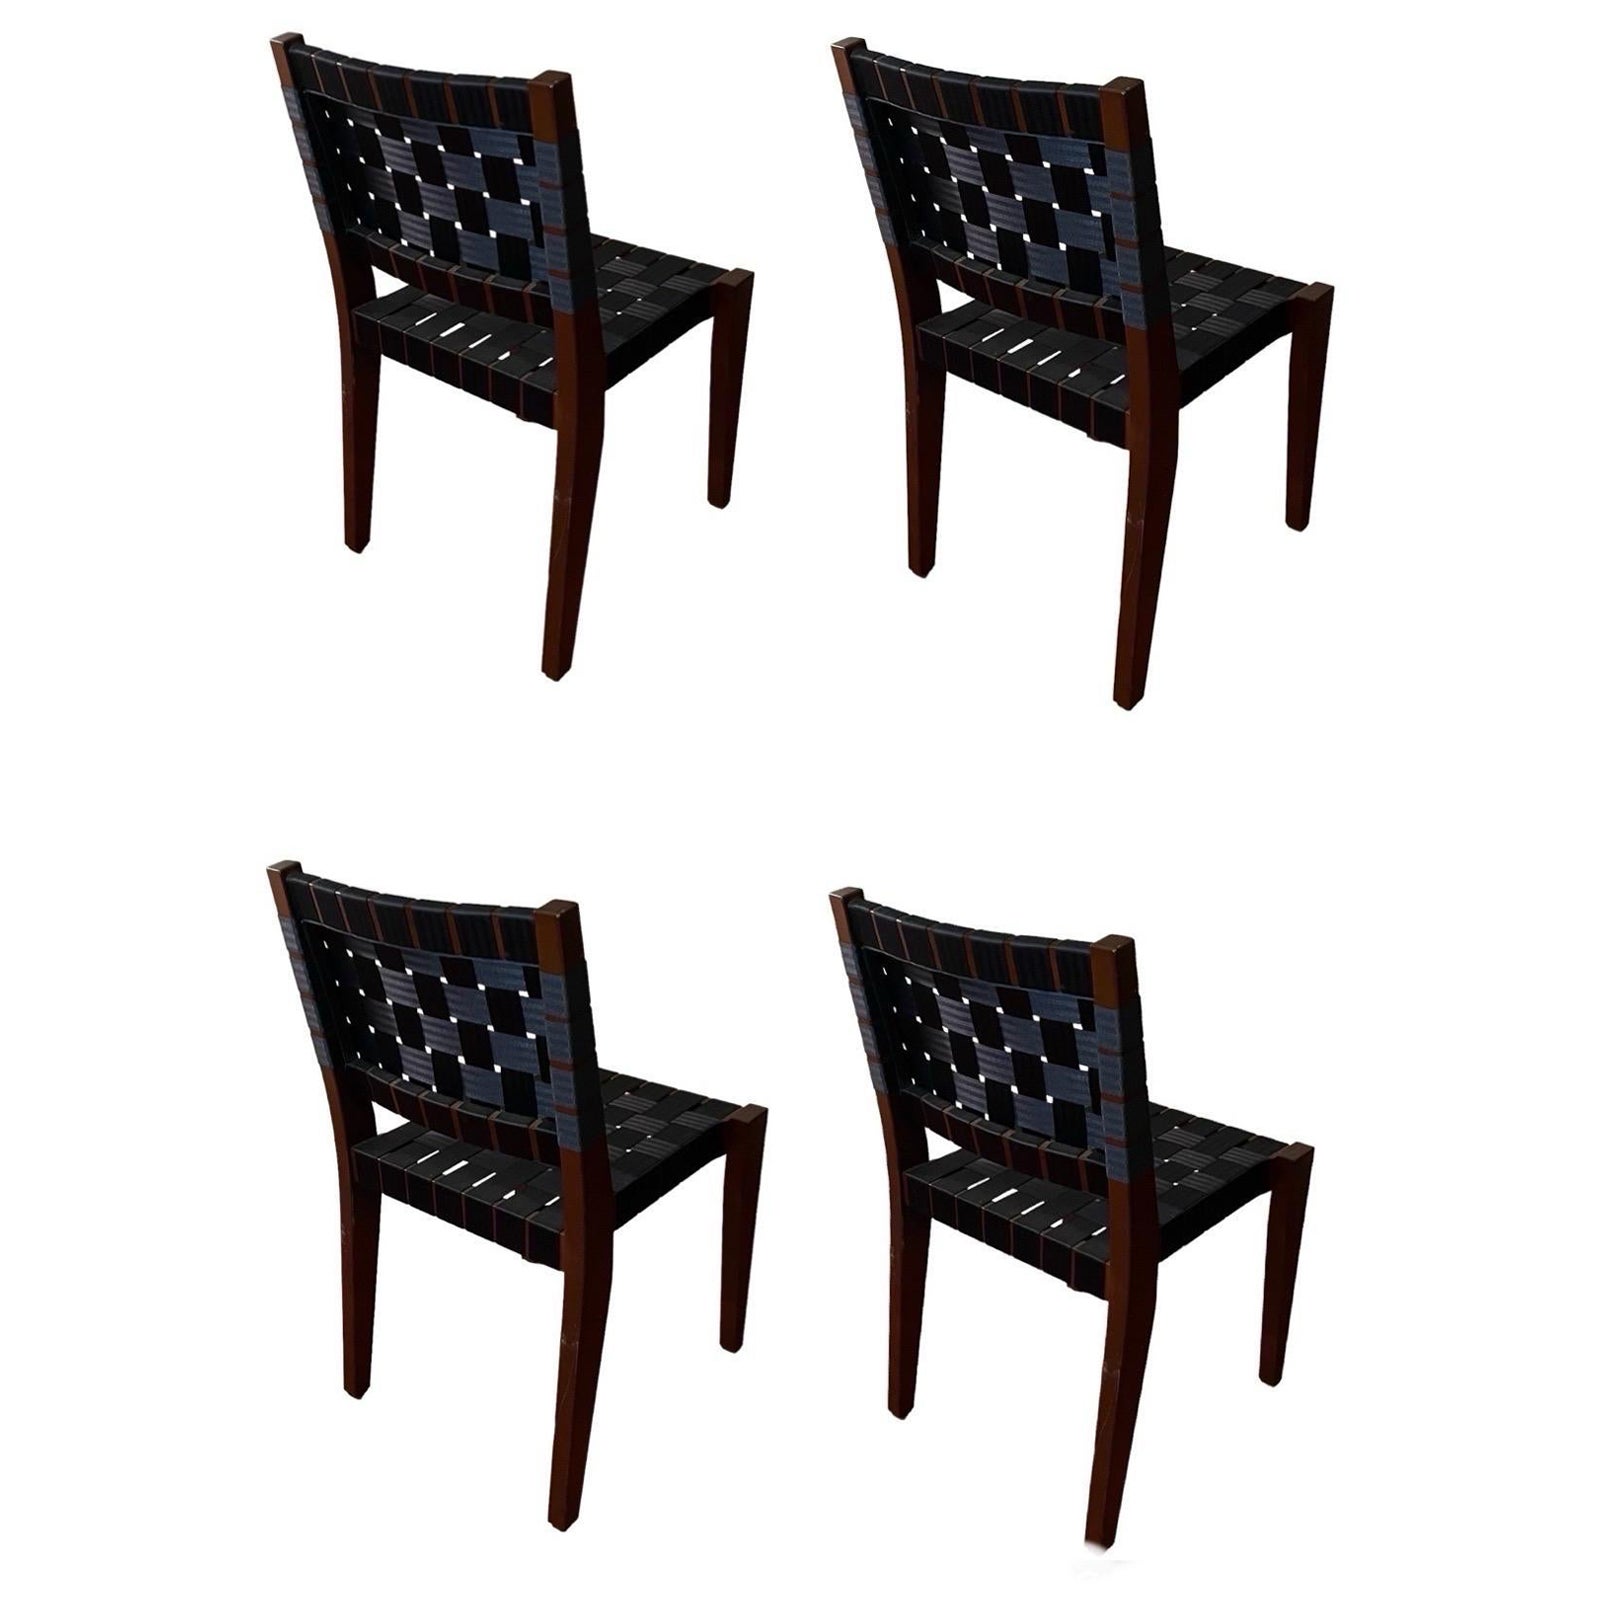 Peter Danko Ashton Side Chairs With Navy Blue Woven Seat & Back, Set of 4